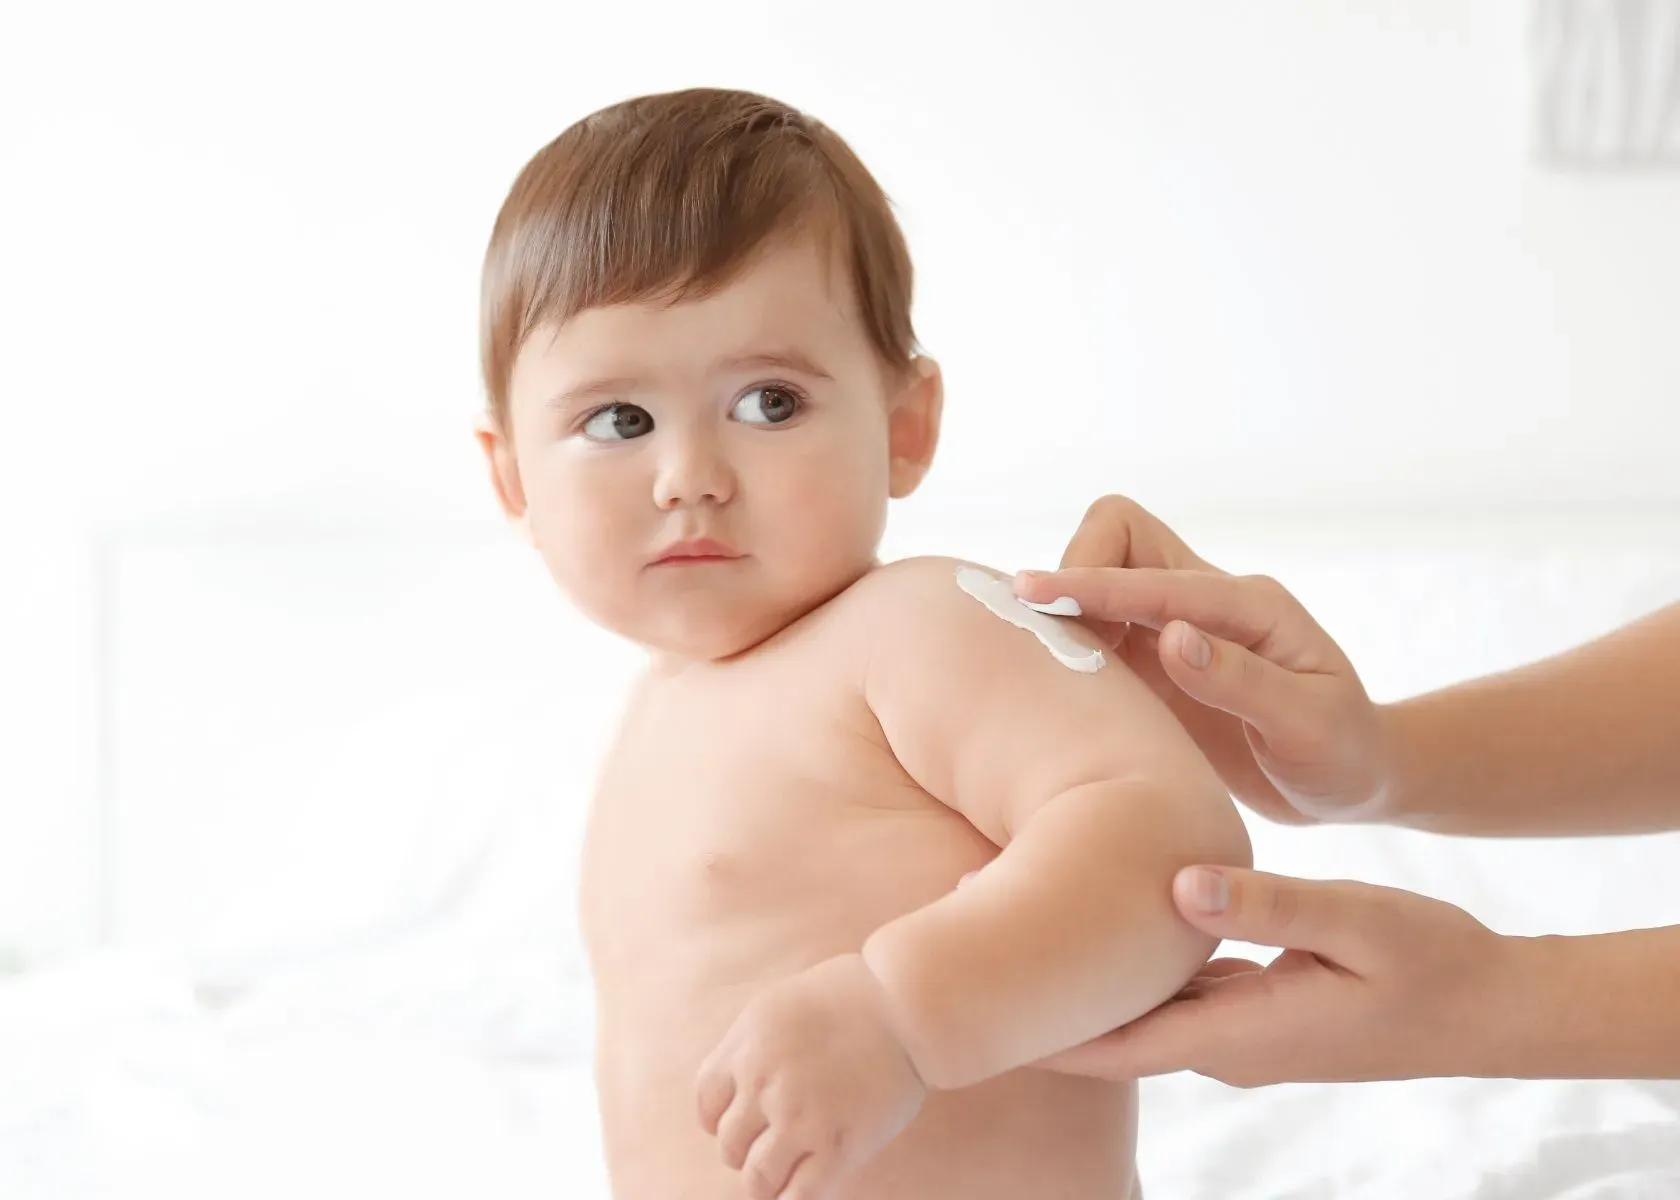 Other Ways to Care for Your Baby's Skin